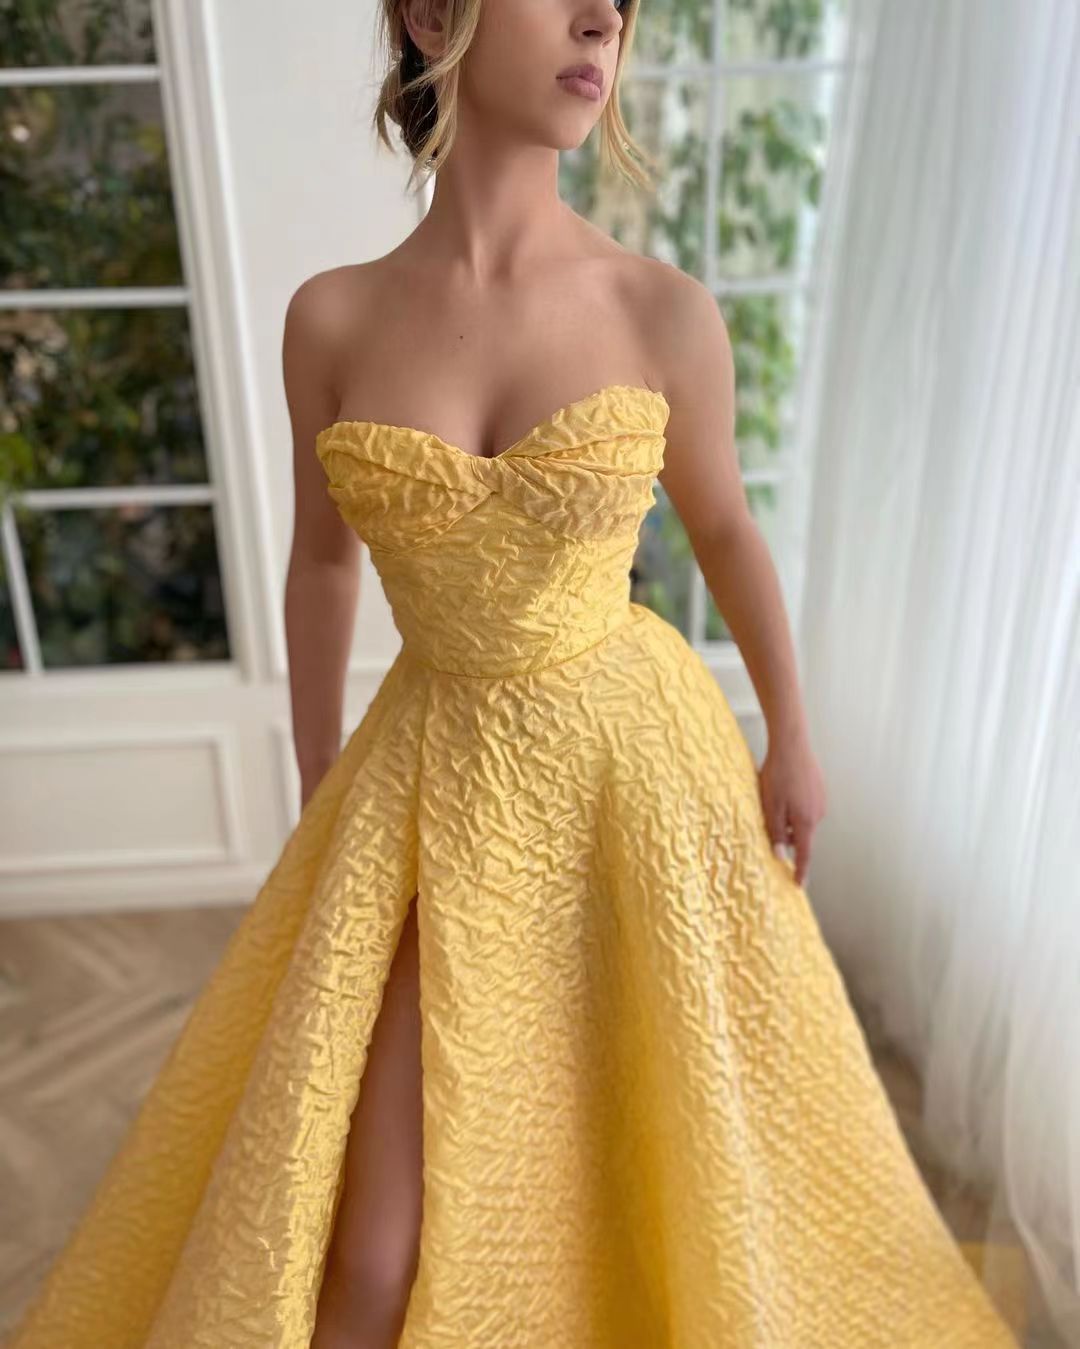 Strapless A-line Long Prom Dresses, Newest 2023 Long Prom Dresses, Girl Graduation Couture Dresses